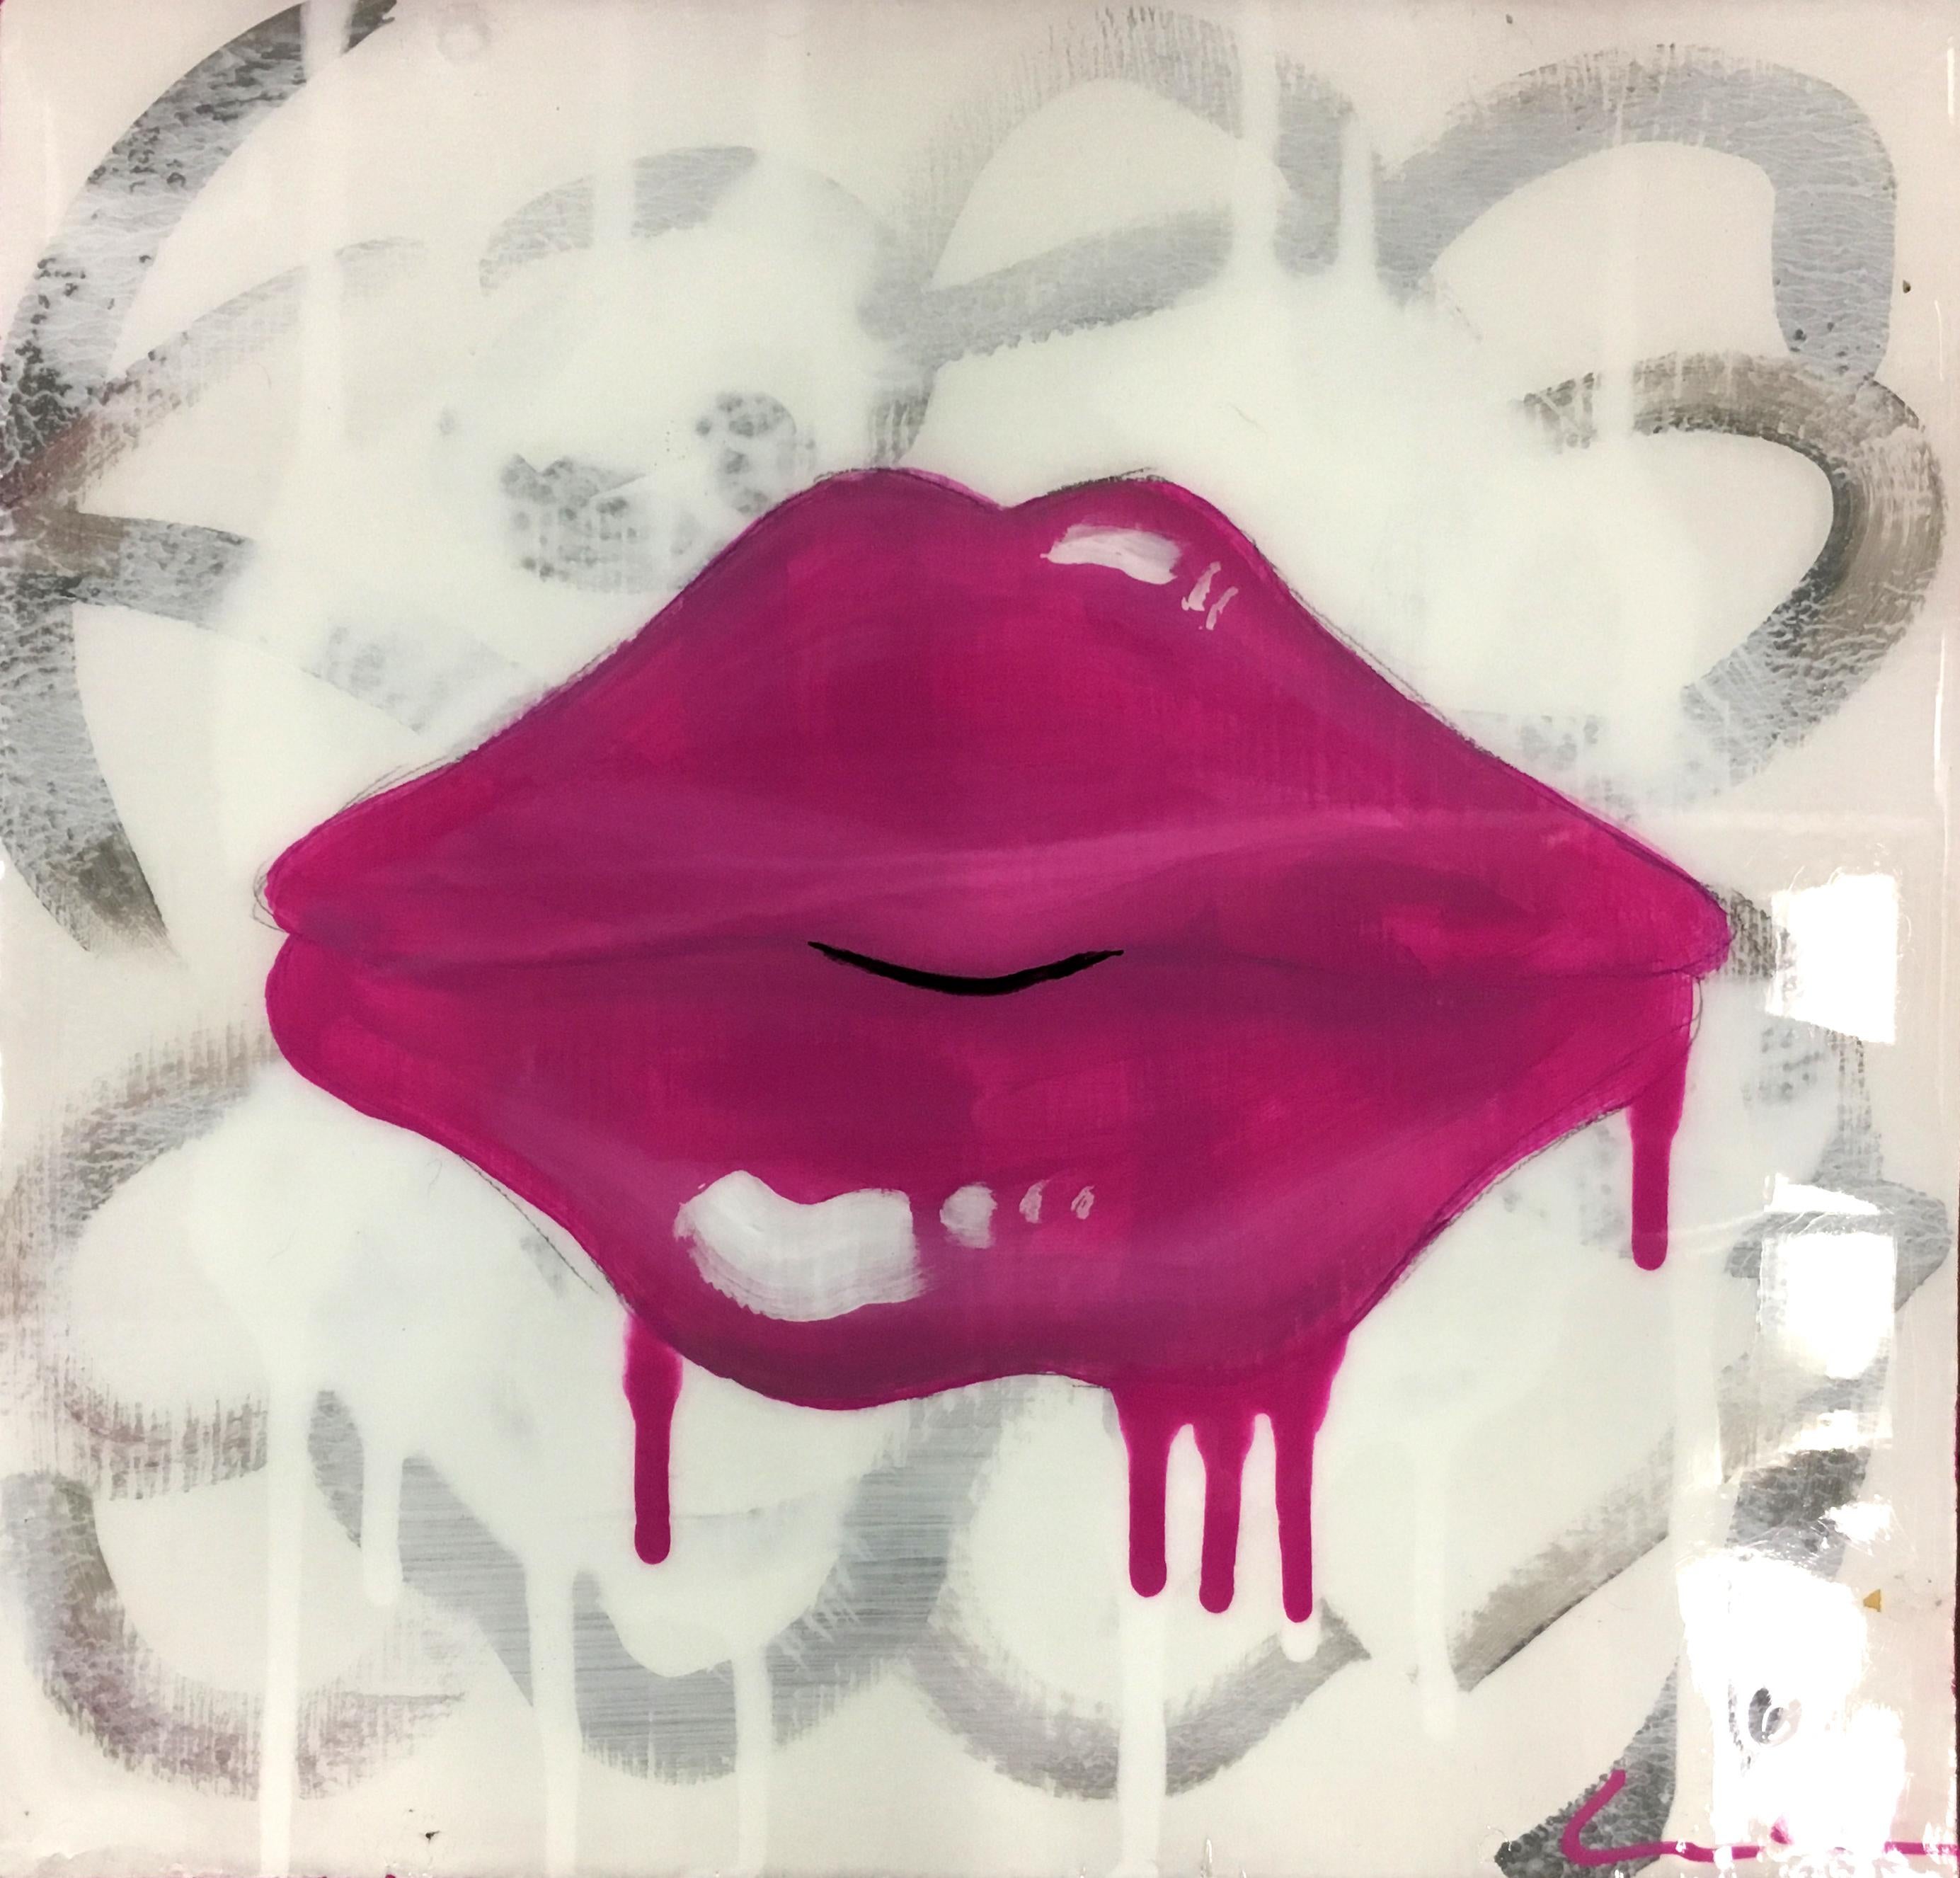 Diane Portwood Figurative Painting - Lip Painting - Hot Pink